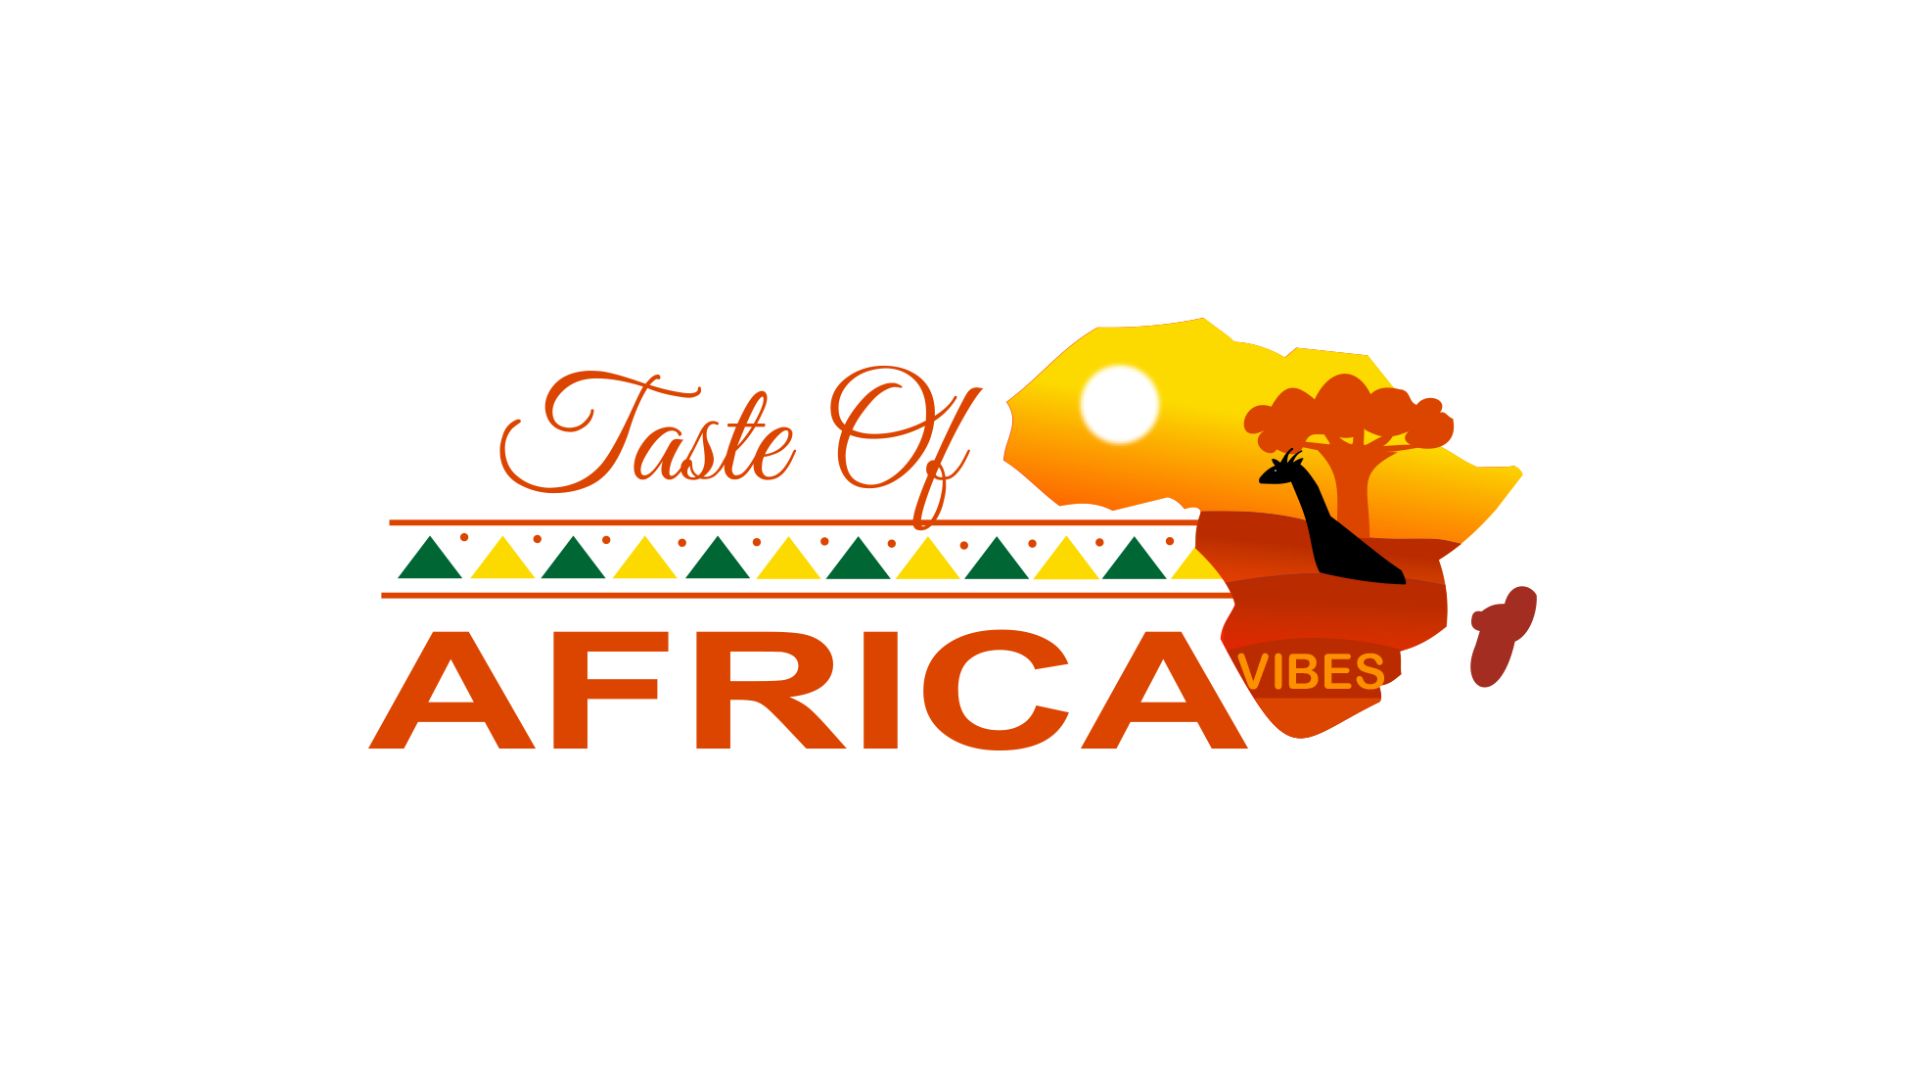 Africa Travel Content Creators Conference organized by Taste of Africa Vibes